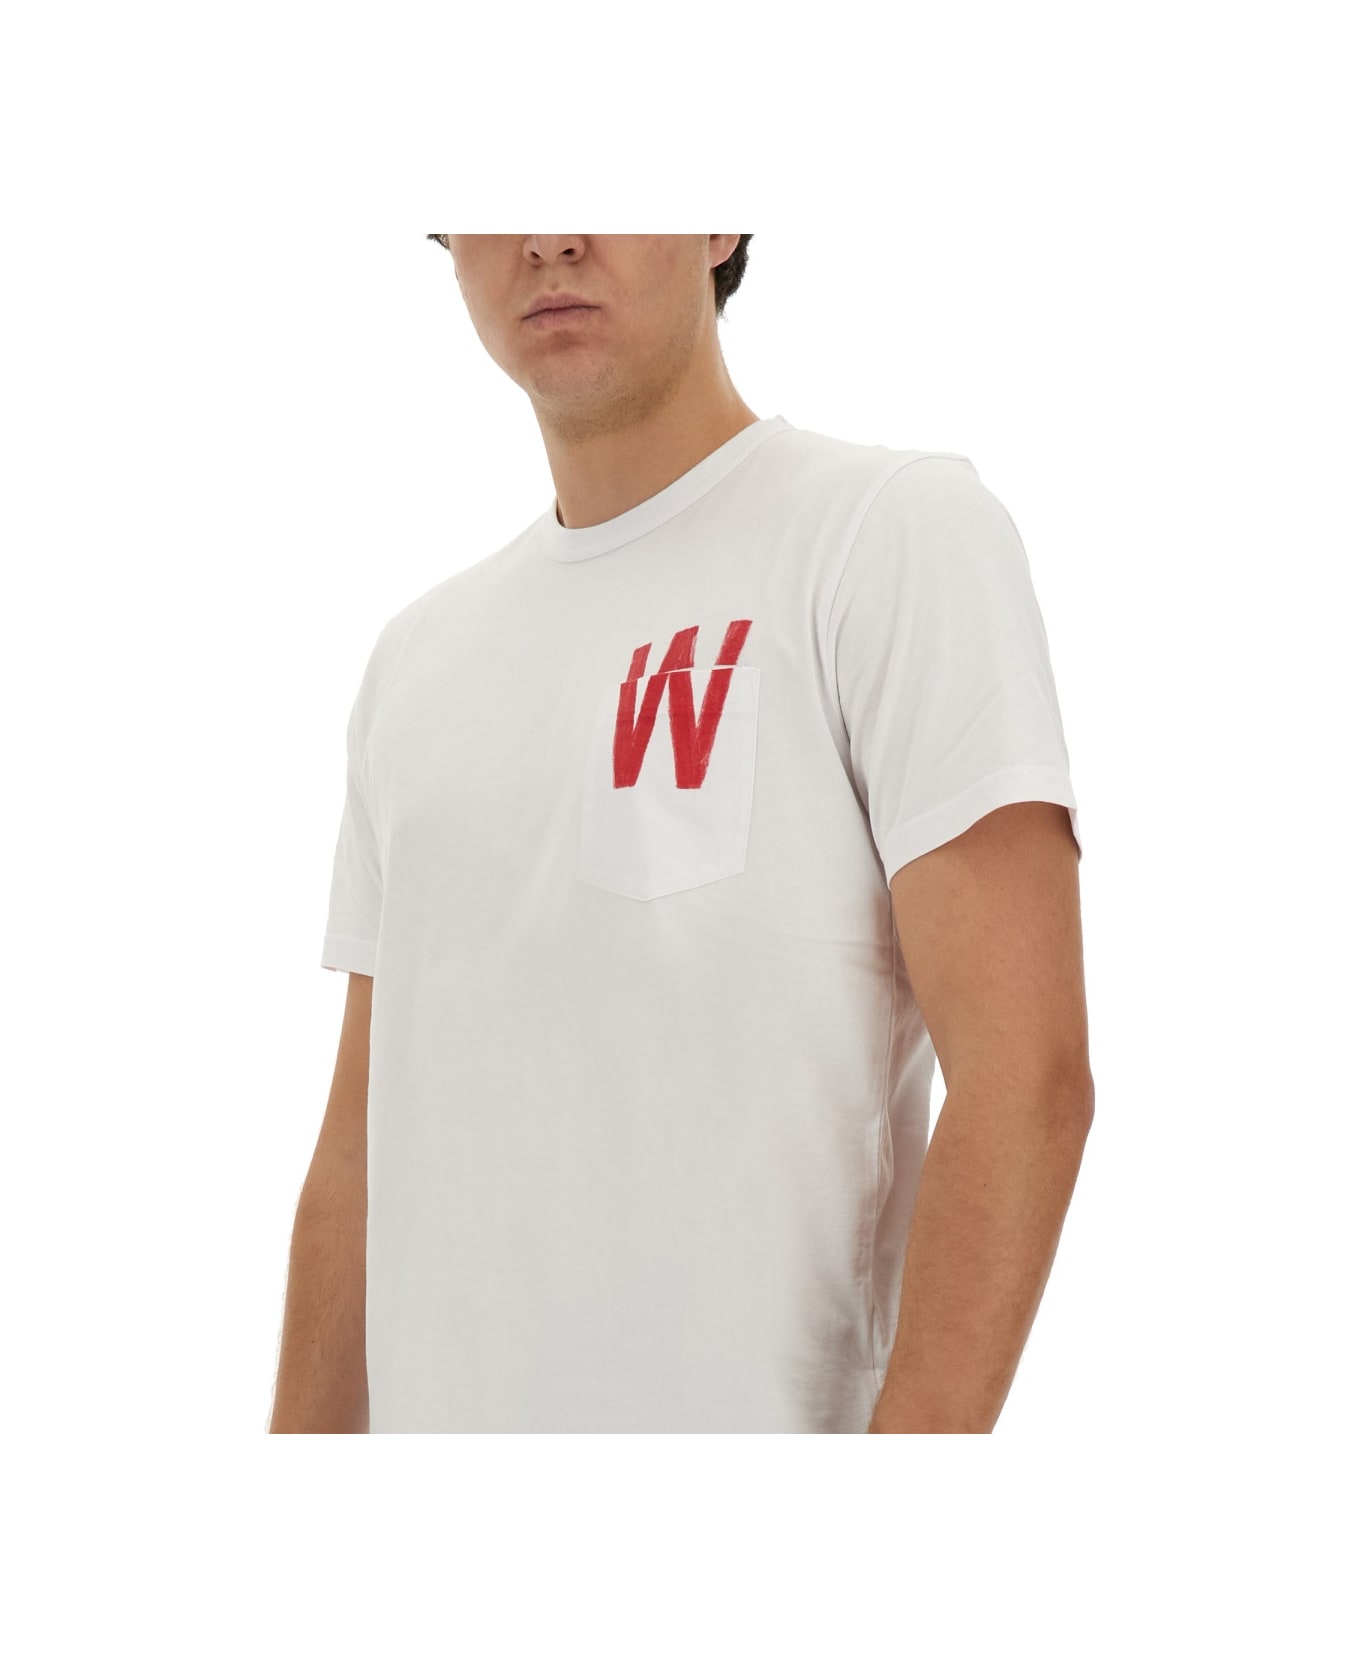 Woolrich T-shirt With Logo - WHITE シャツ